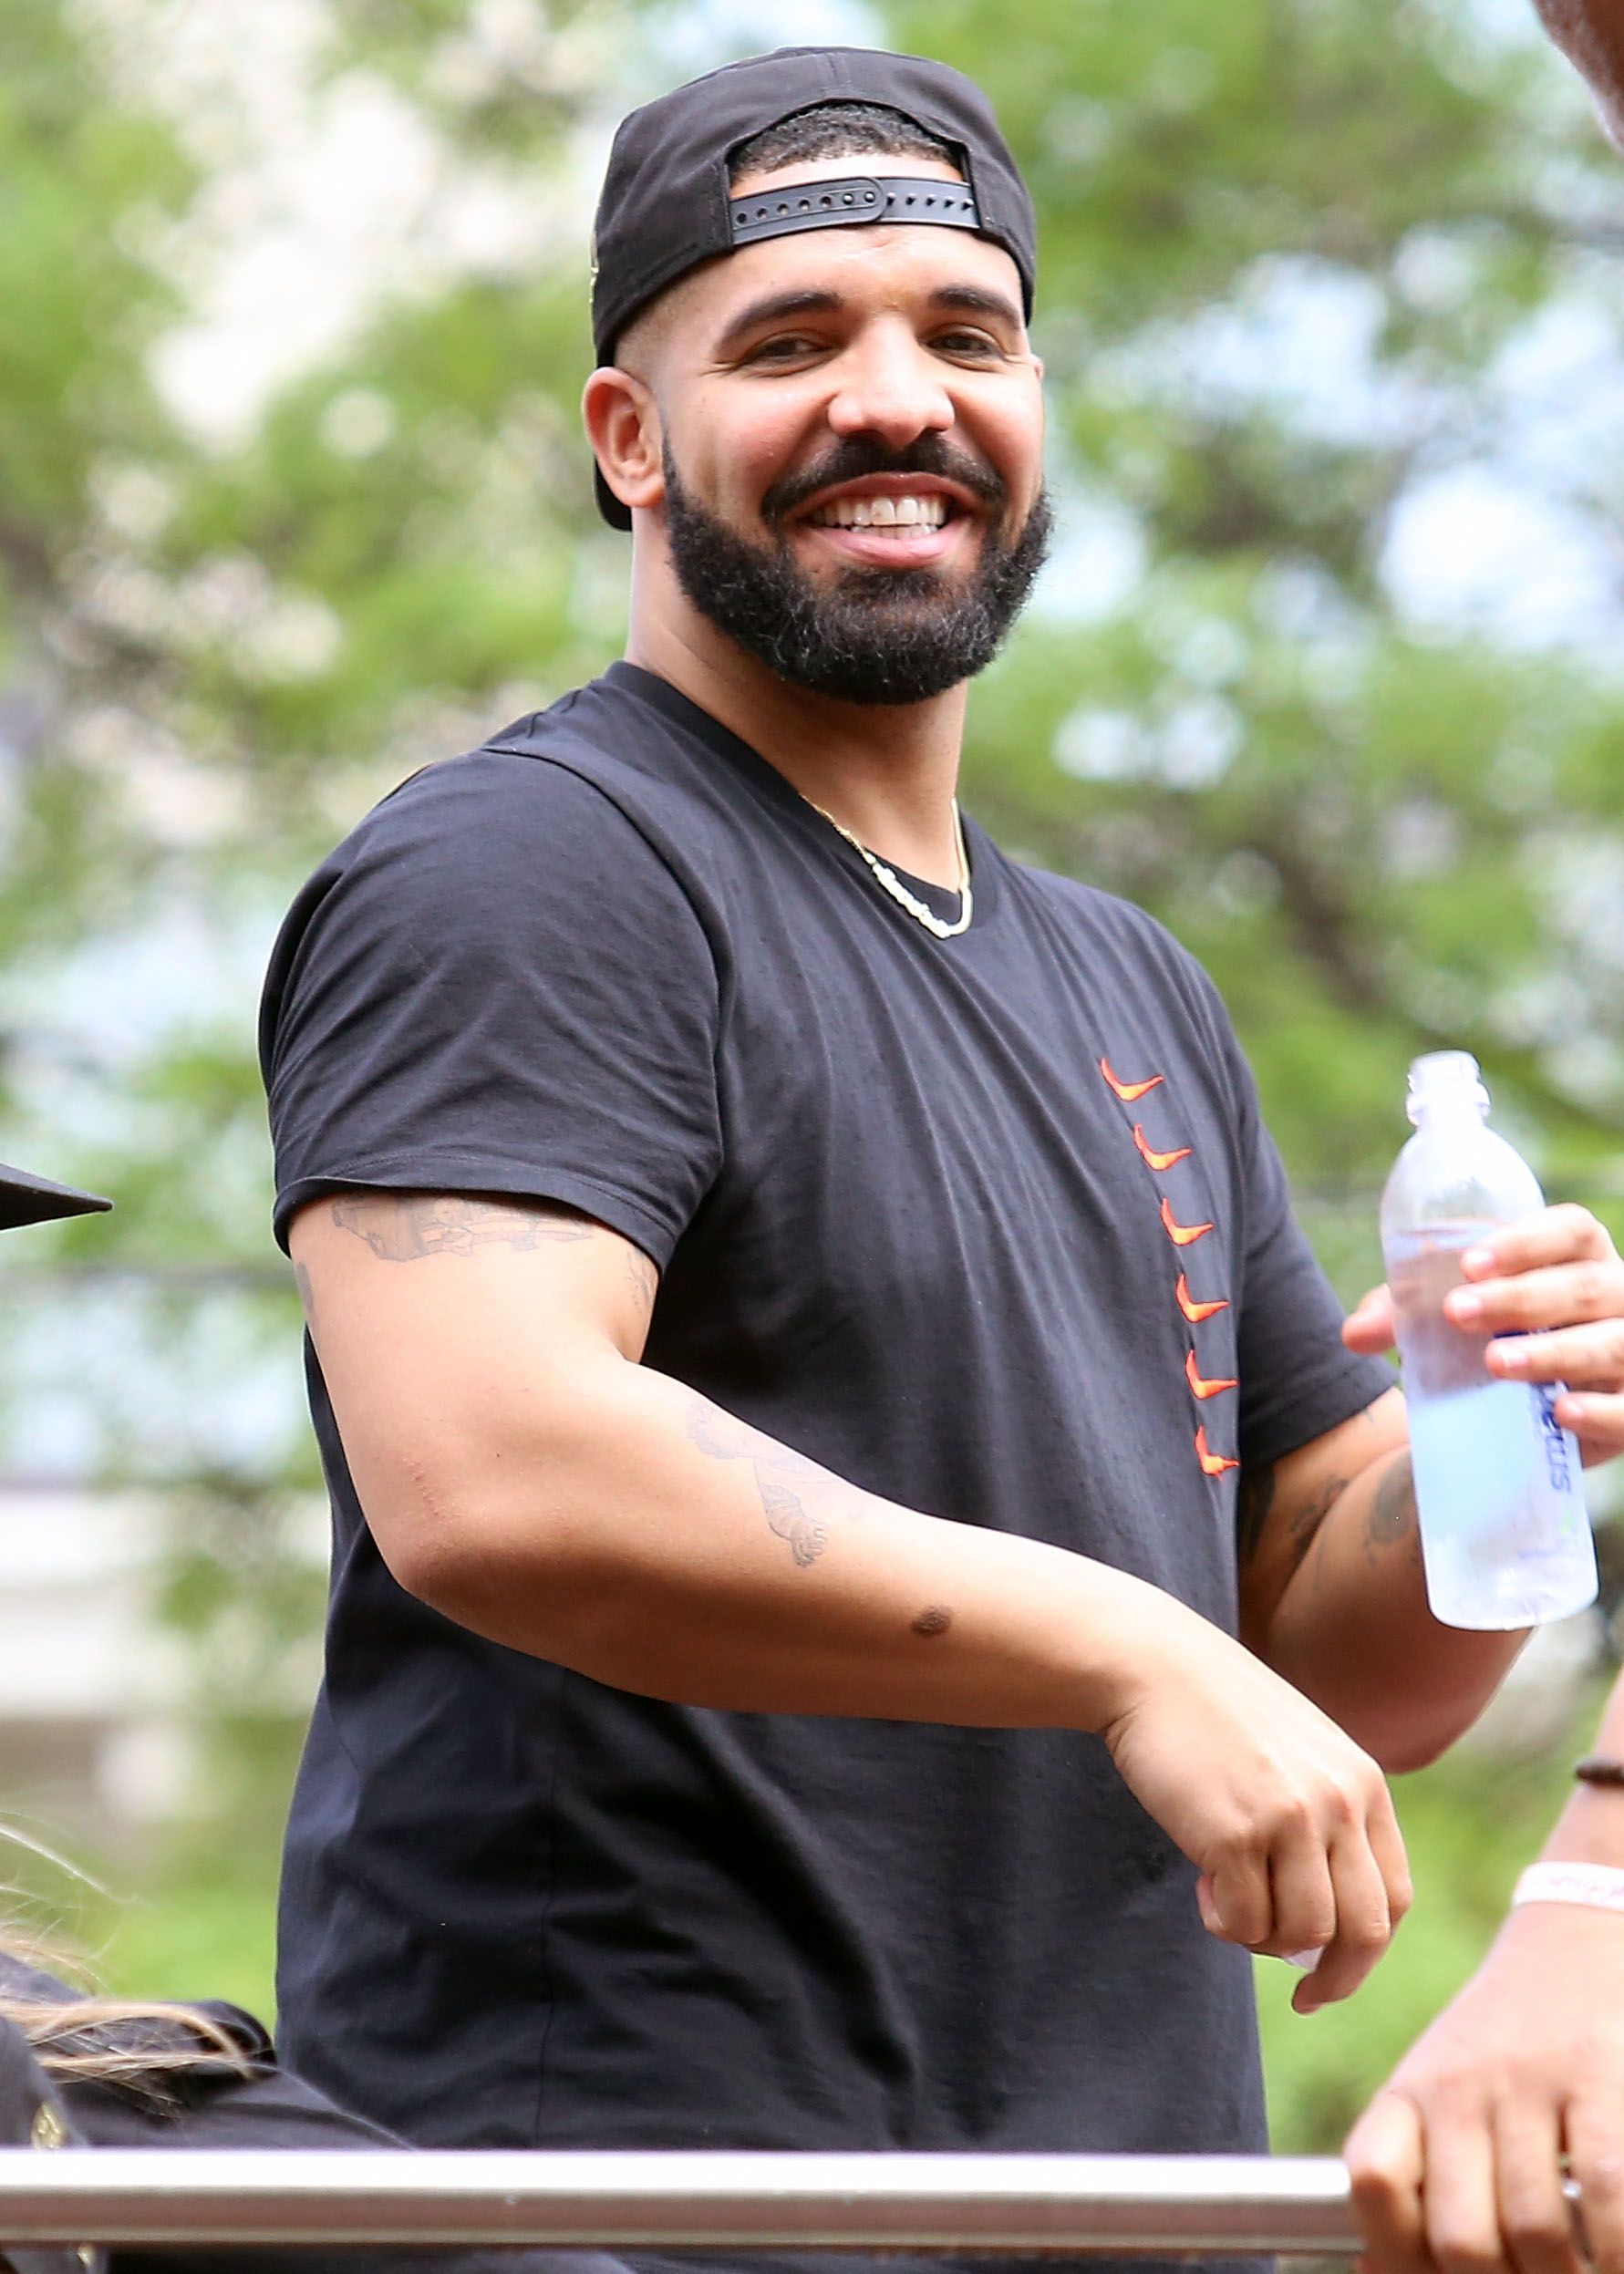 Internet Reacts to Drakes Face Tattoo Dedicated to His Mother  Parade  Entertainment Recipes Health Life Holidays